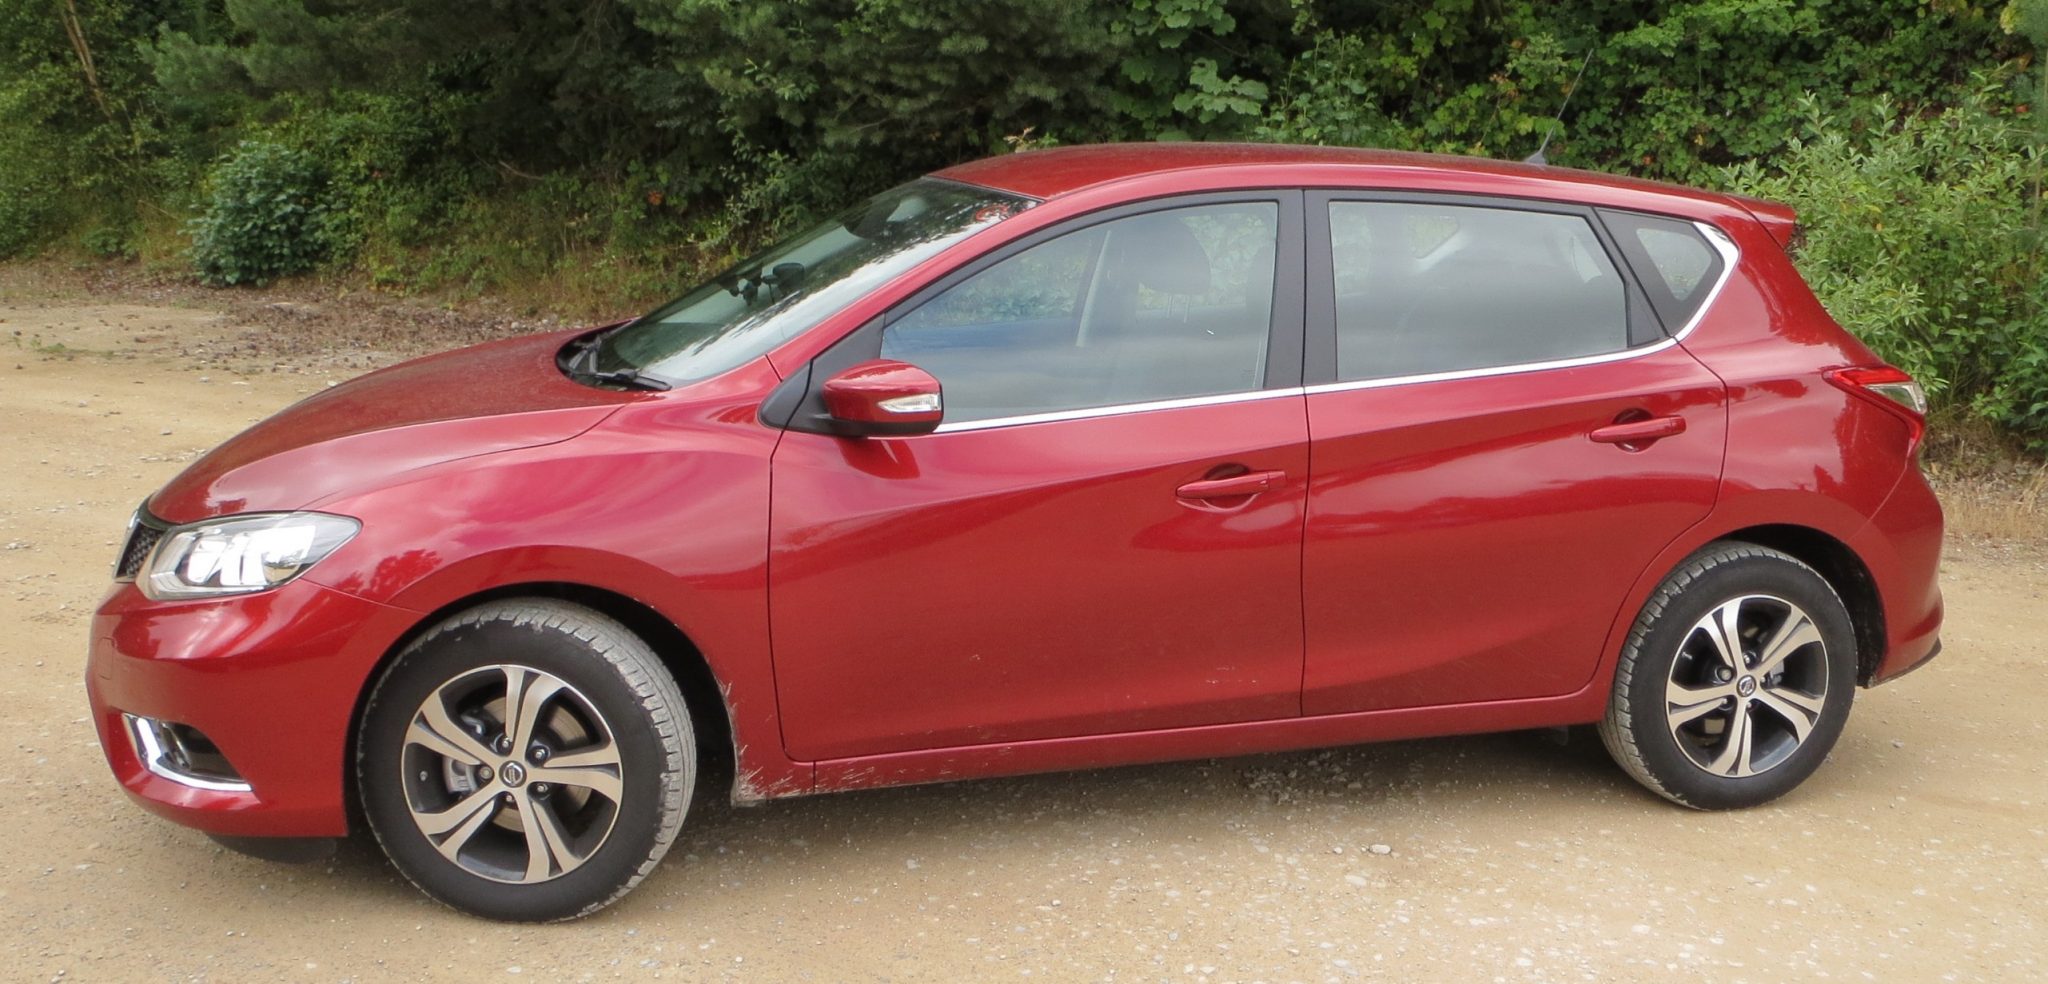 Nissan Pulsar 1.2 DIGT 115 road test report and review